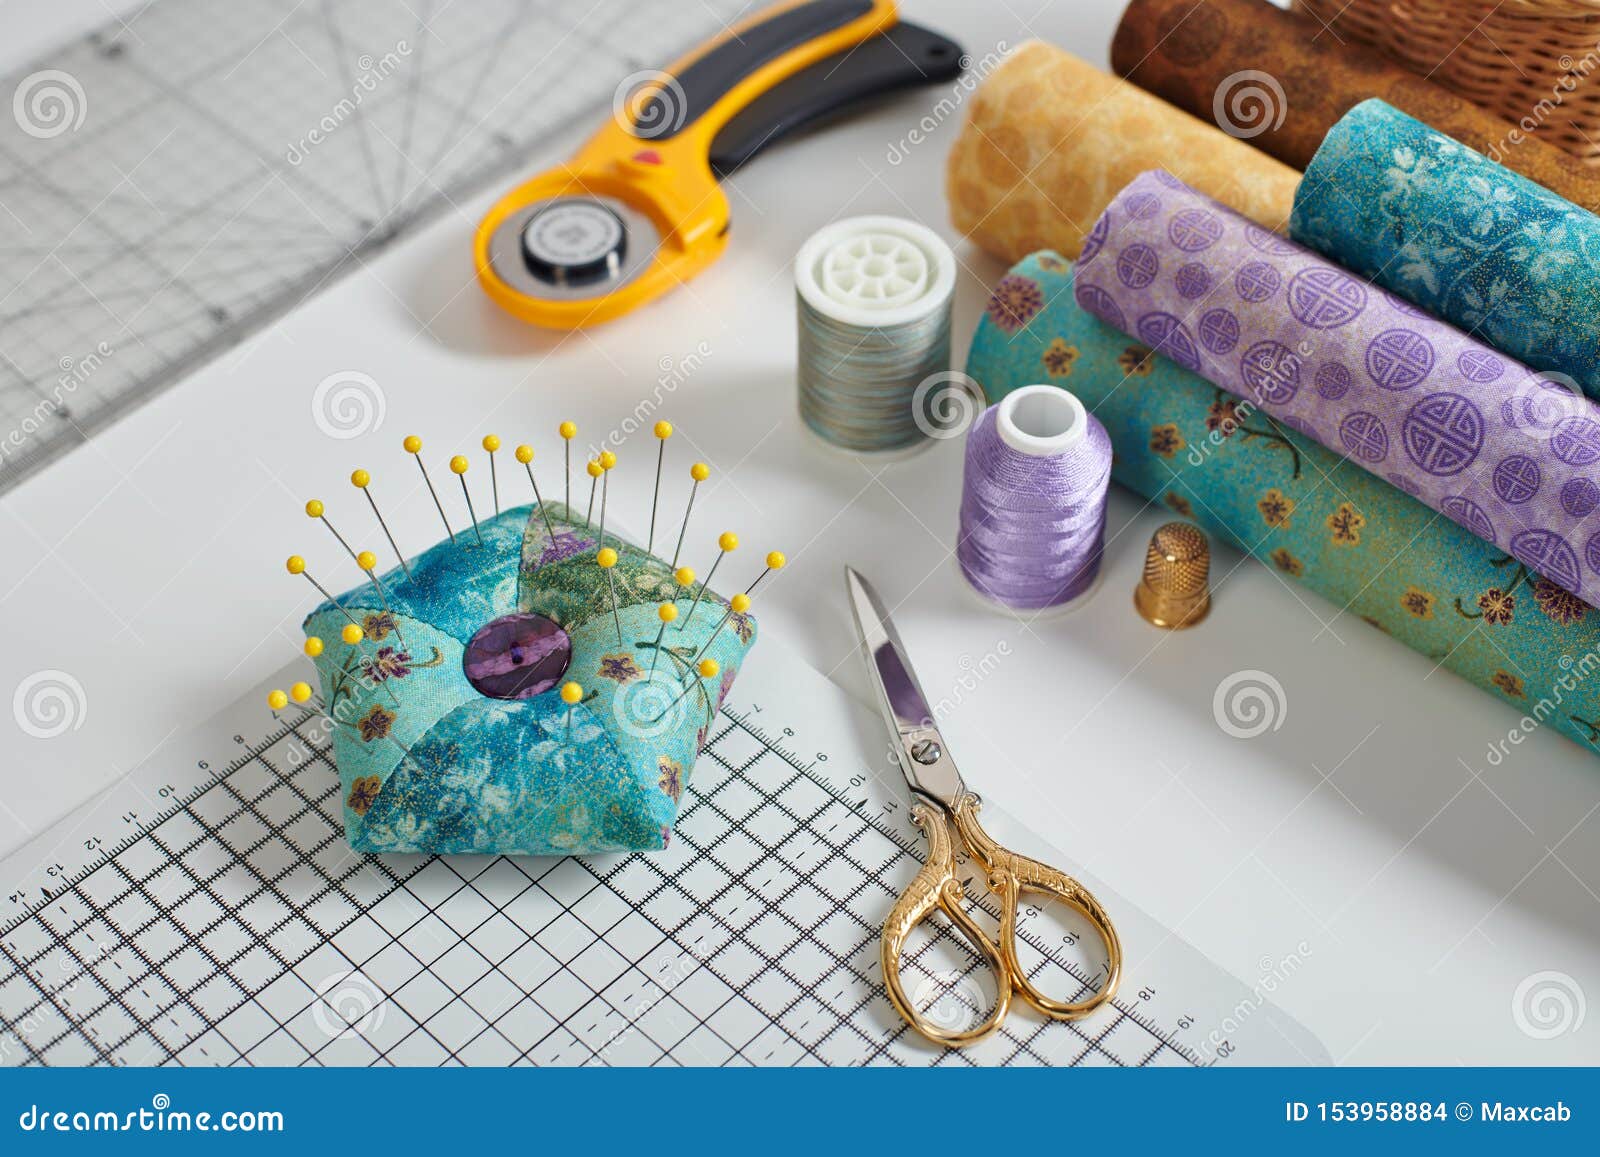 1,084 Rotary Cutter Fabric Images, Stock Photos, 3D objects, & Vectors